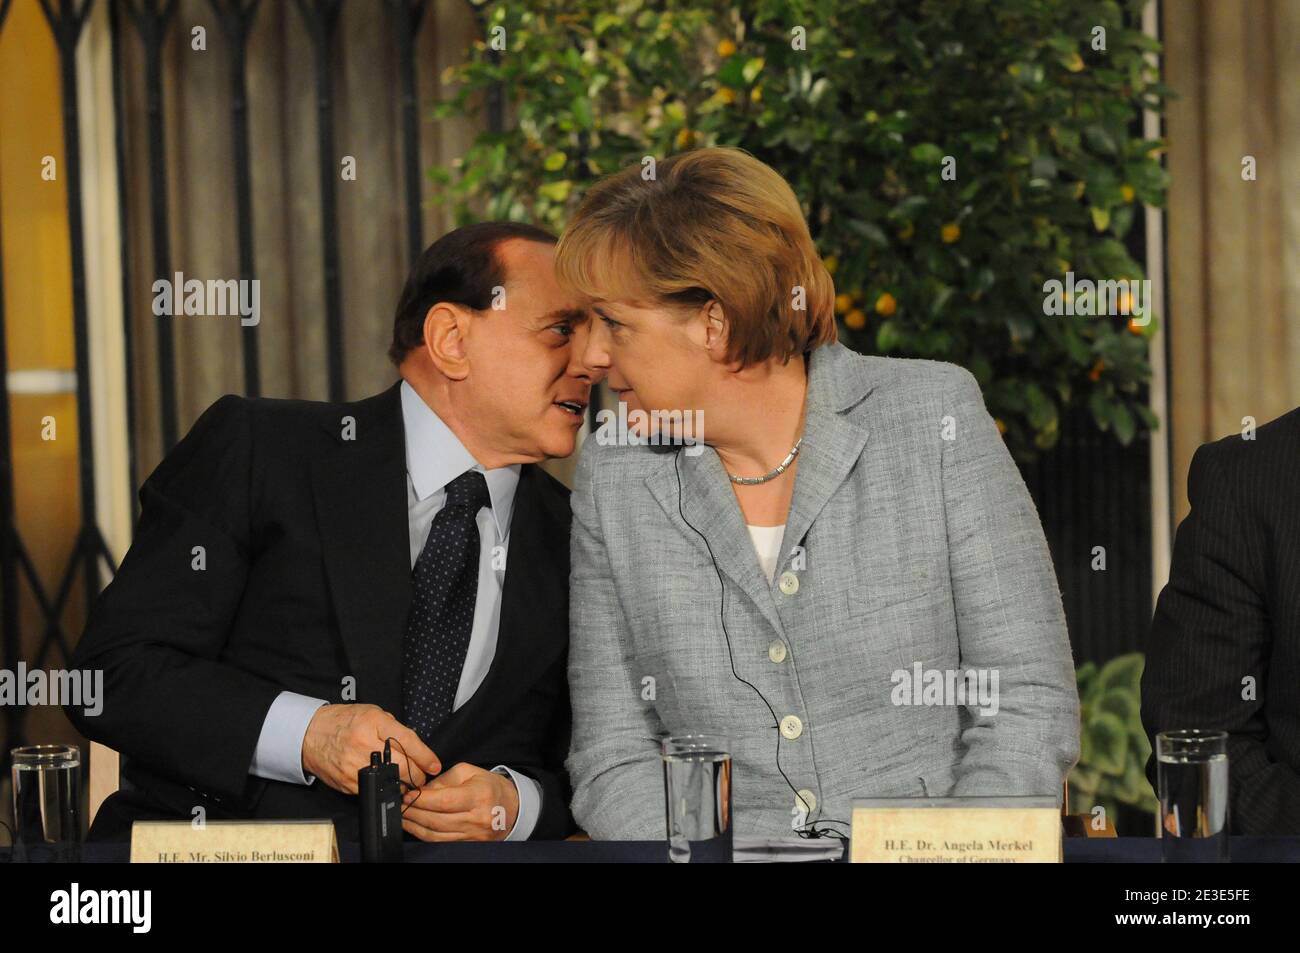 Italian Prime Minister Silvio Berlusconi is whispering to German Chancellor Angela Merkel during a joint press conference with other European leaders at the residence of Israeli Prime Minister Ehud Olmert in Jerusalem, Israel on January 18, 2009. Photo by Ammar Abd Rabbo/ABACAPRESS.COM Stock Photo